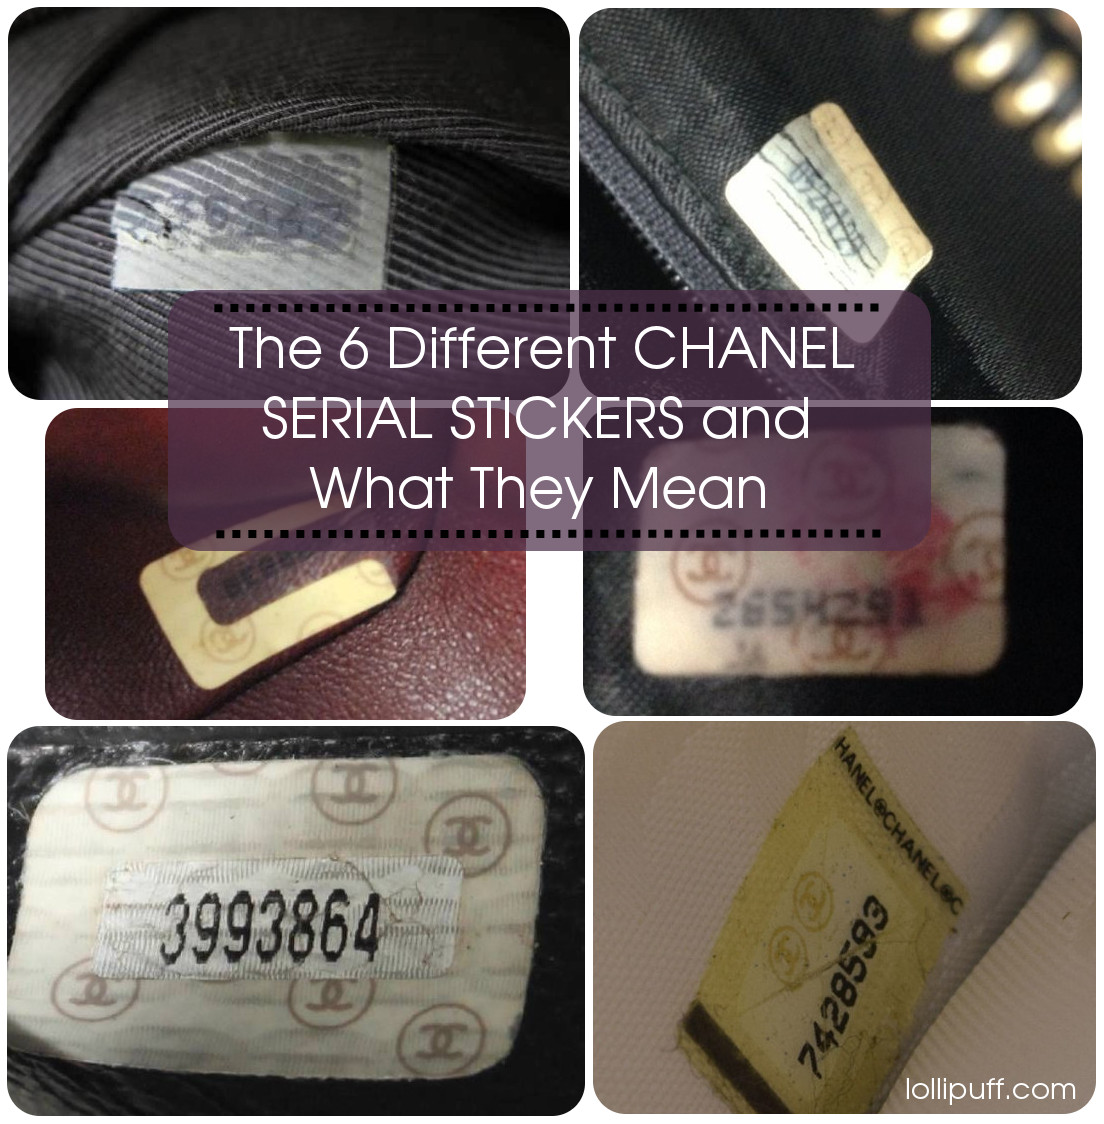 Chanel Serial Number Guide